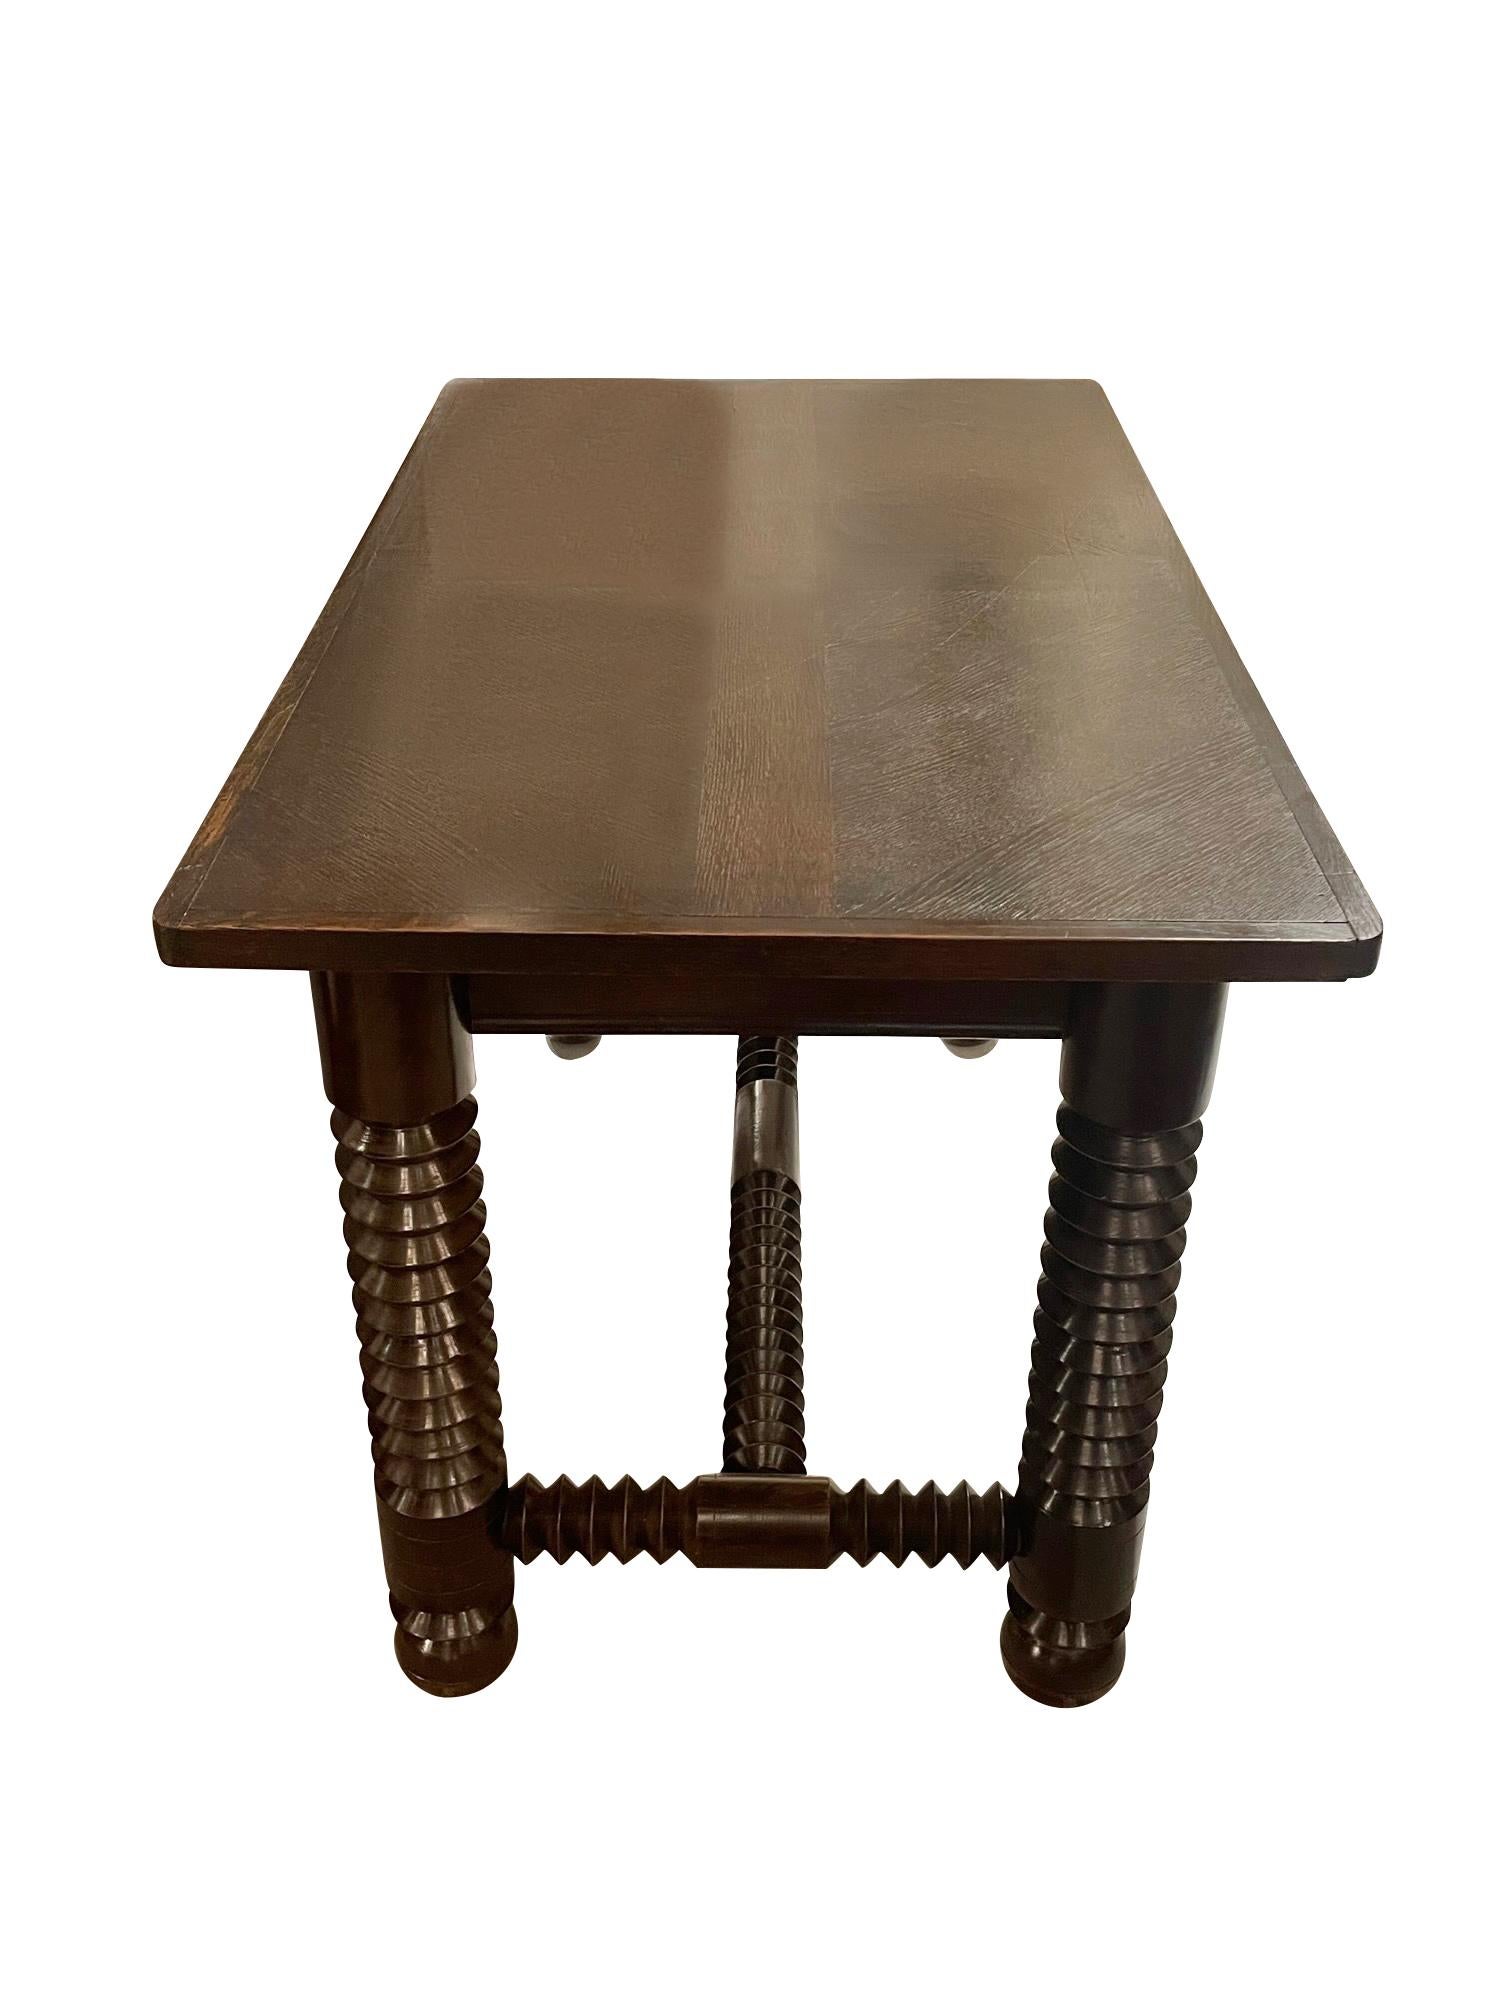 1940's French Charles Dudouyt console.
Can also be used as a desk.
Signature spool leg and stretcher design. 
Ball shaped legs.
Recently restored and refinished.